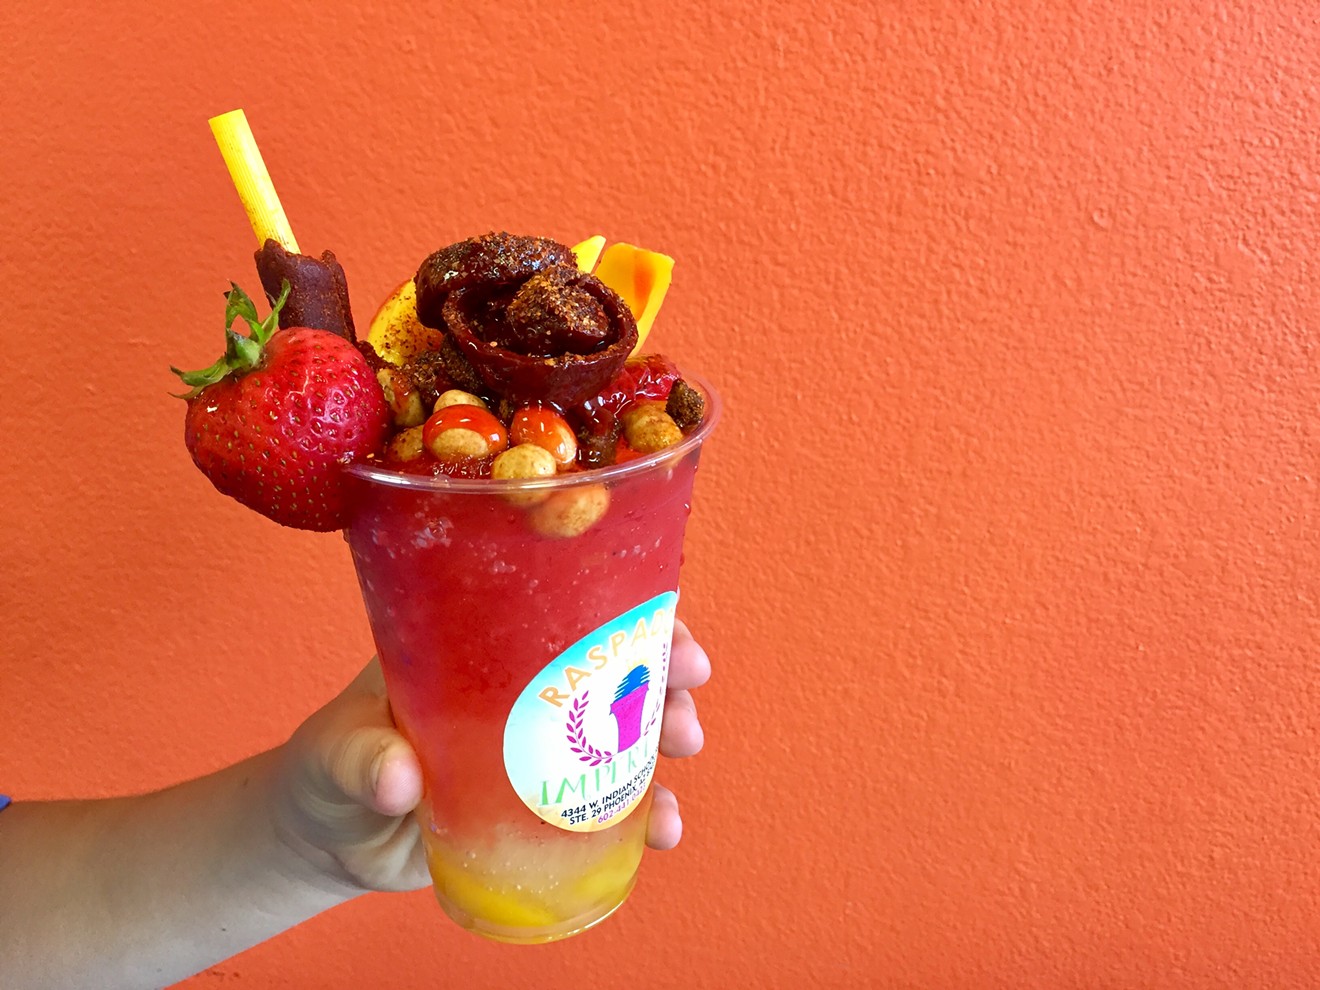 Sweet, spicy, icy goodness at Raspados Imperial.